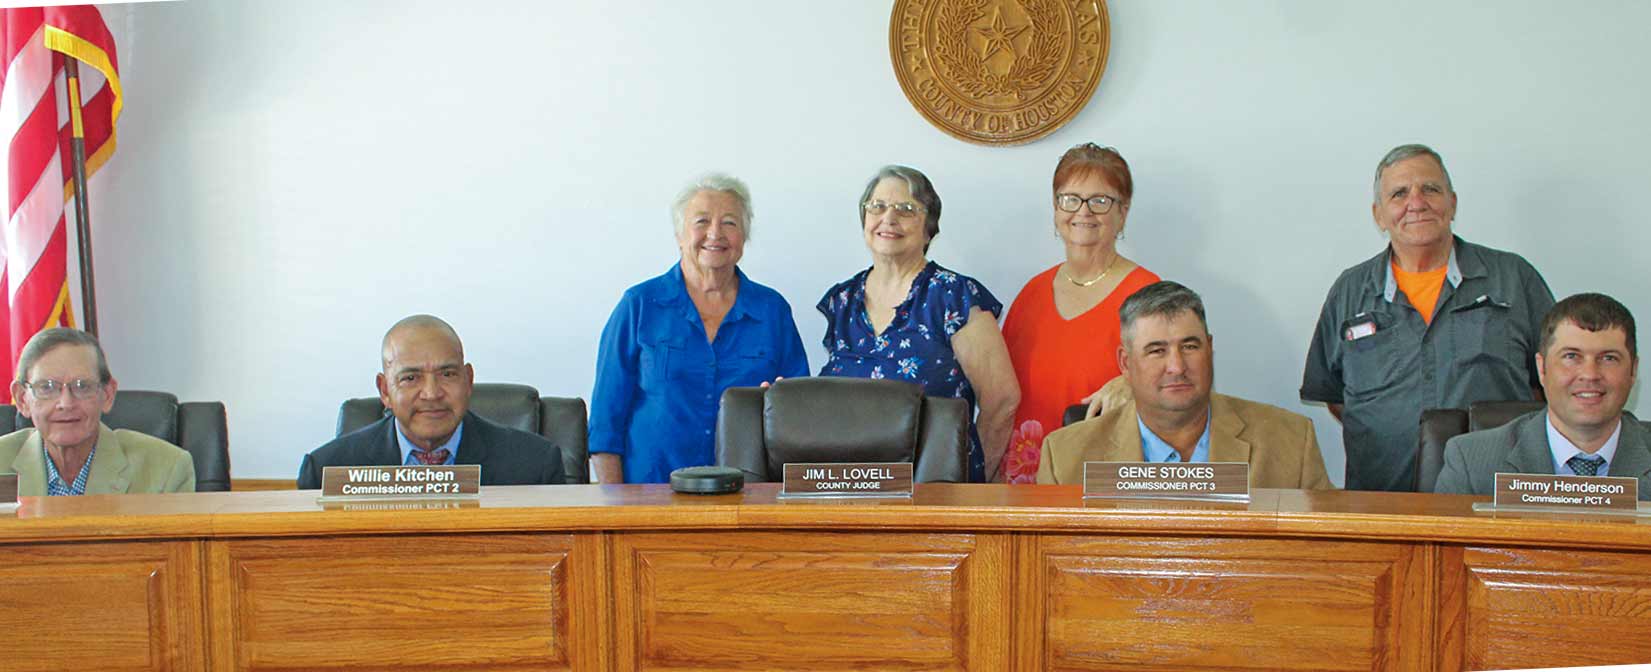 Members of the Houston County Historical Commission, pictured with the Houston County Commissioners, were presented a Distinguished Service Award from the Texas Historical Commission for their outstanding service during Tuesday’s Commissioners Court meeting.  (ALTON PORTER | HCC)